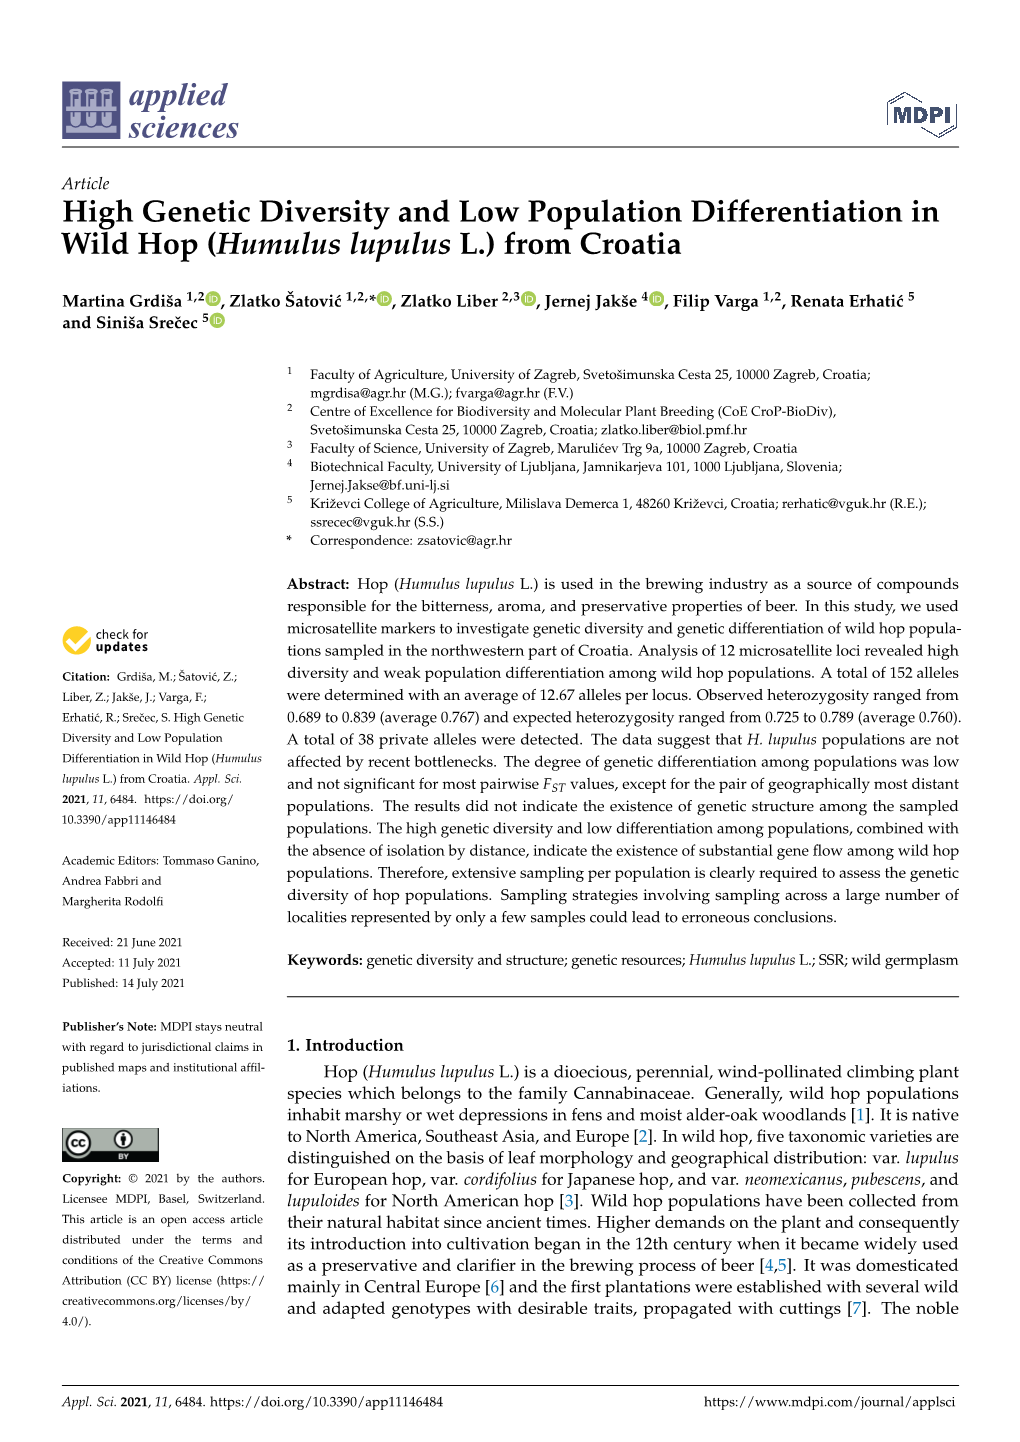 High Genetic Diversity and Low Population Differentiation in Wild Hop (Humulus Lupulus L.) from Croatia